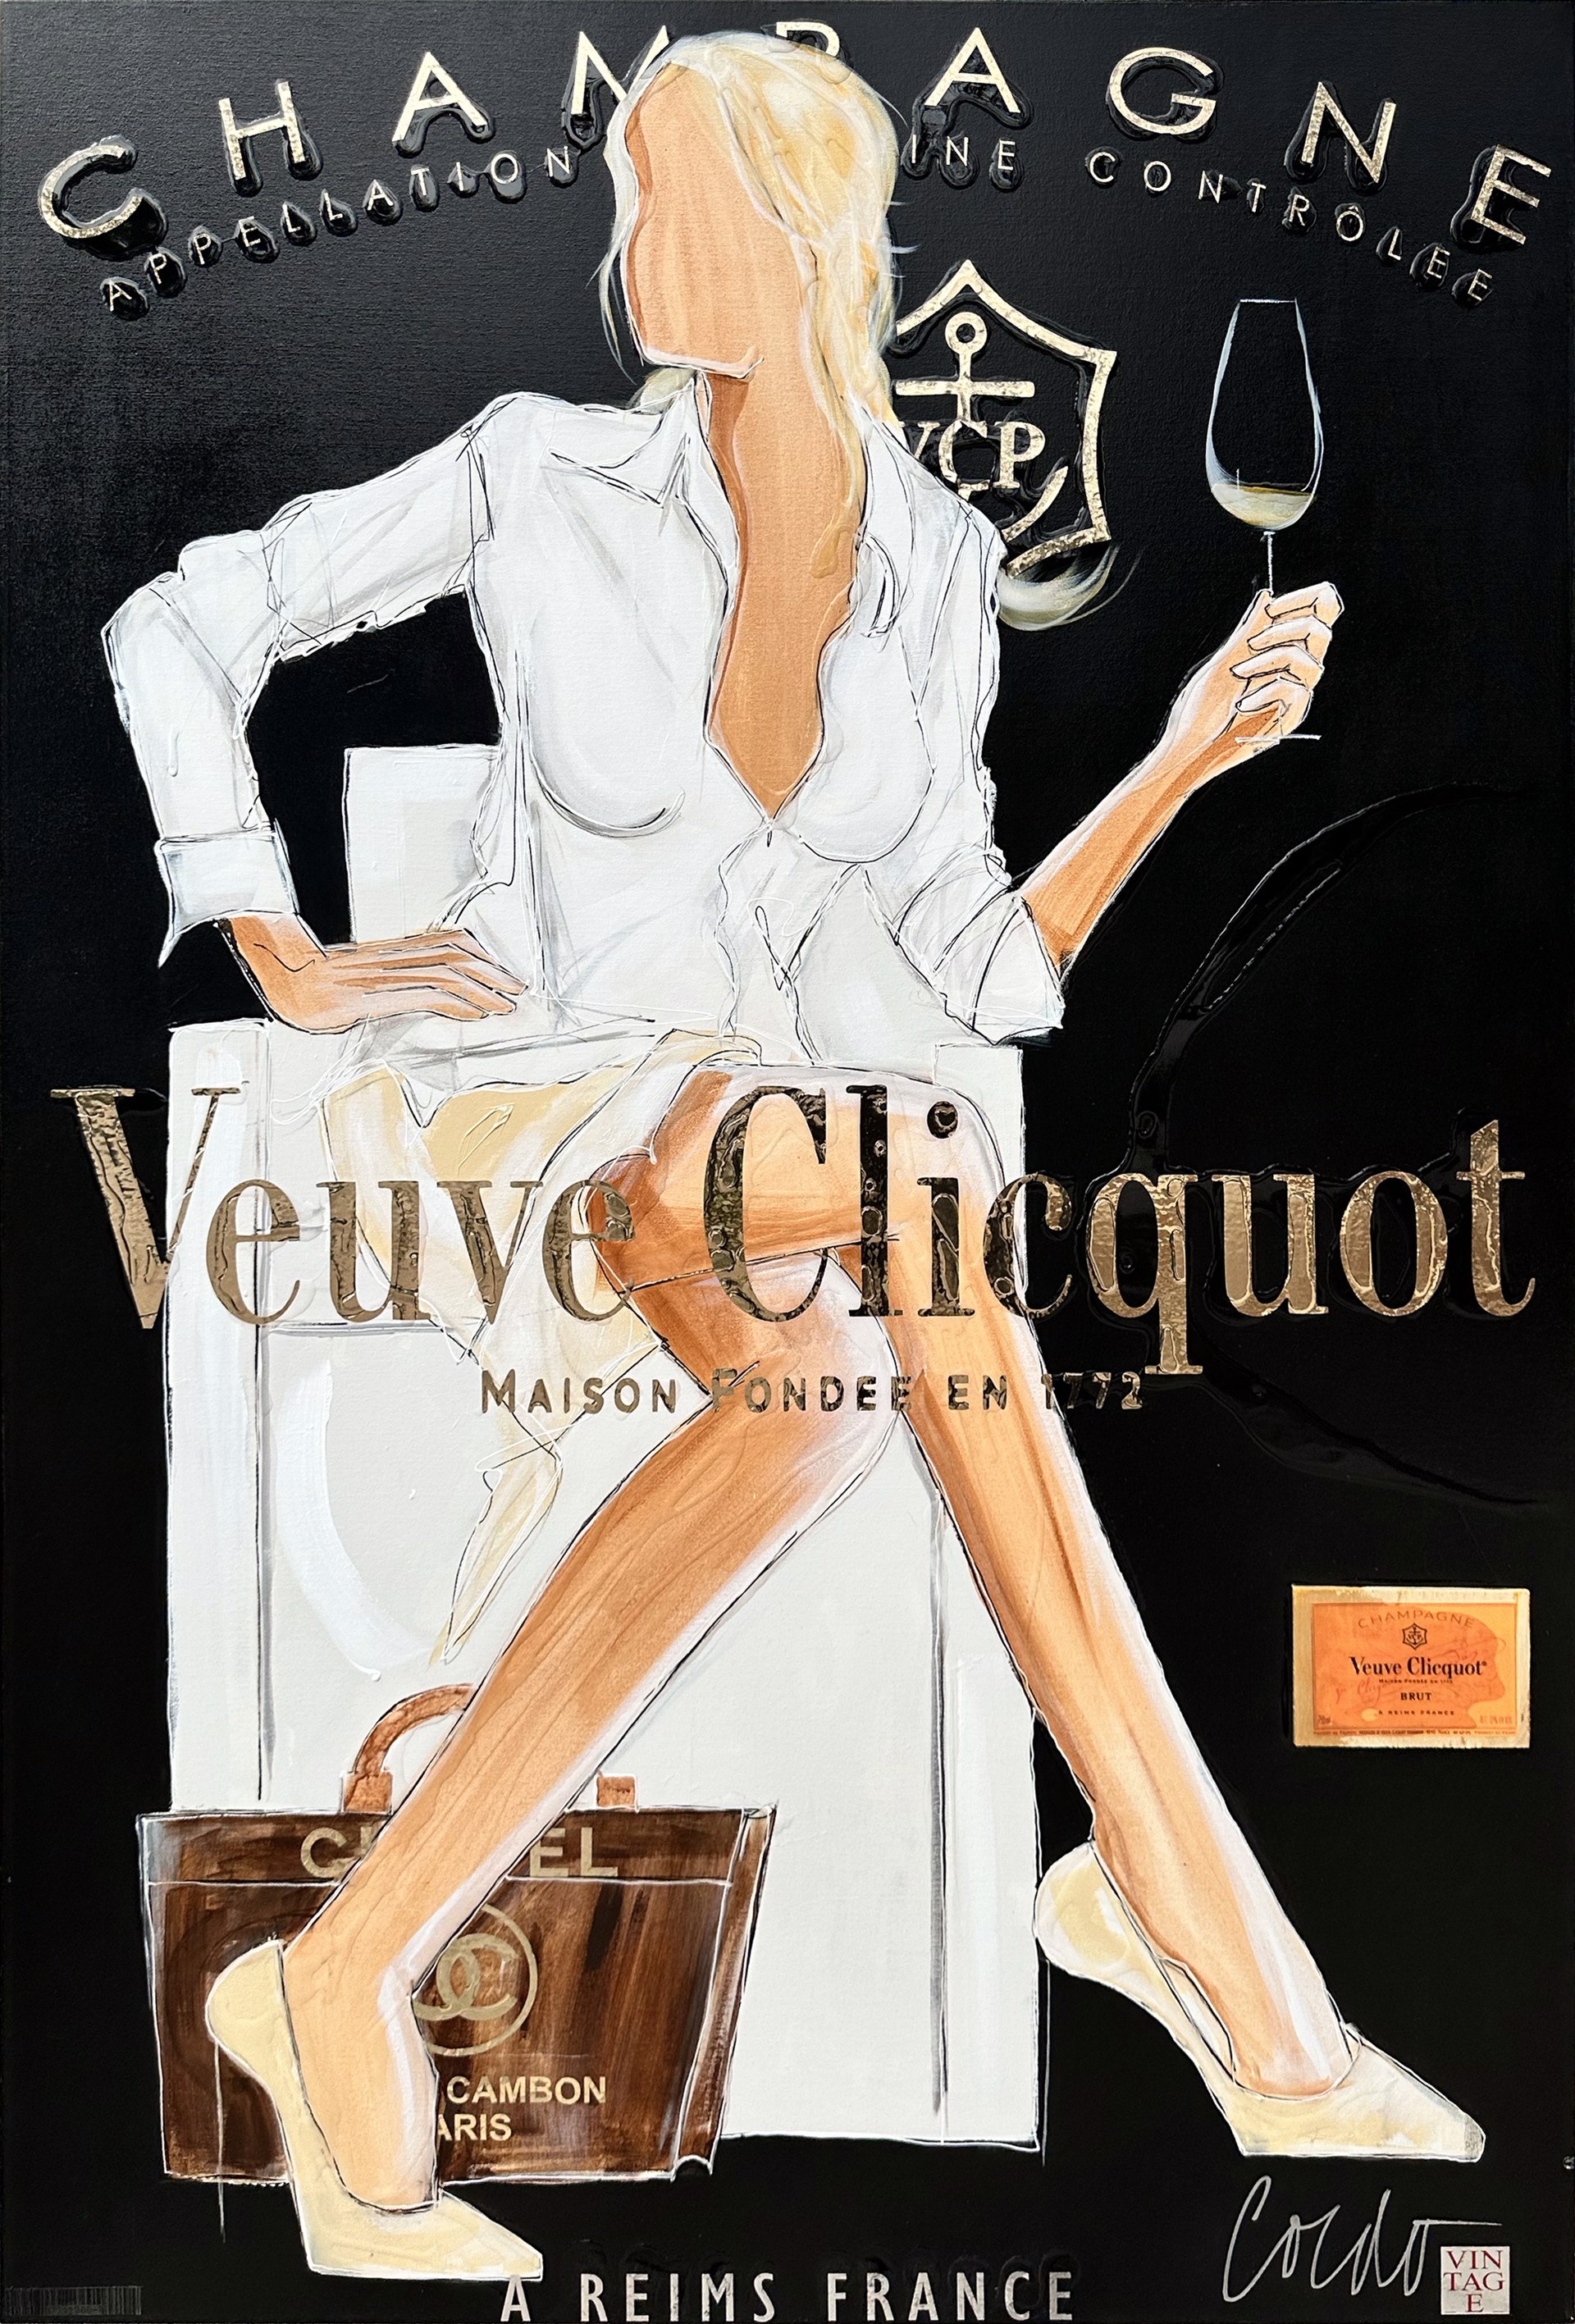 PINOT ON CHANEL by Vincent Cordo